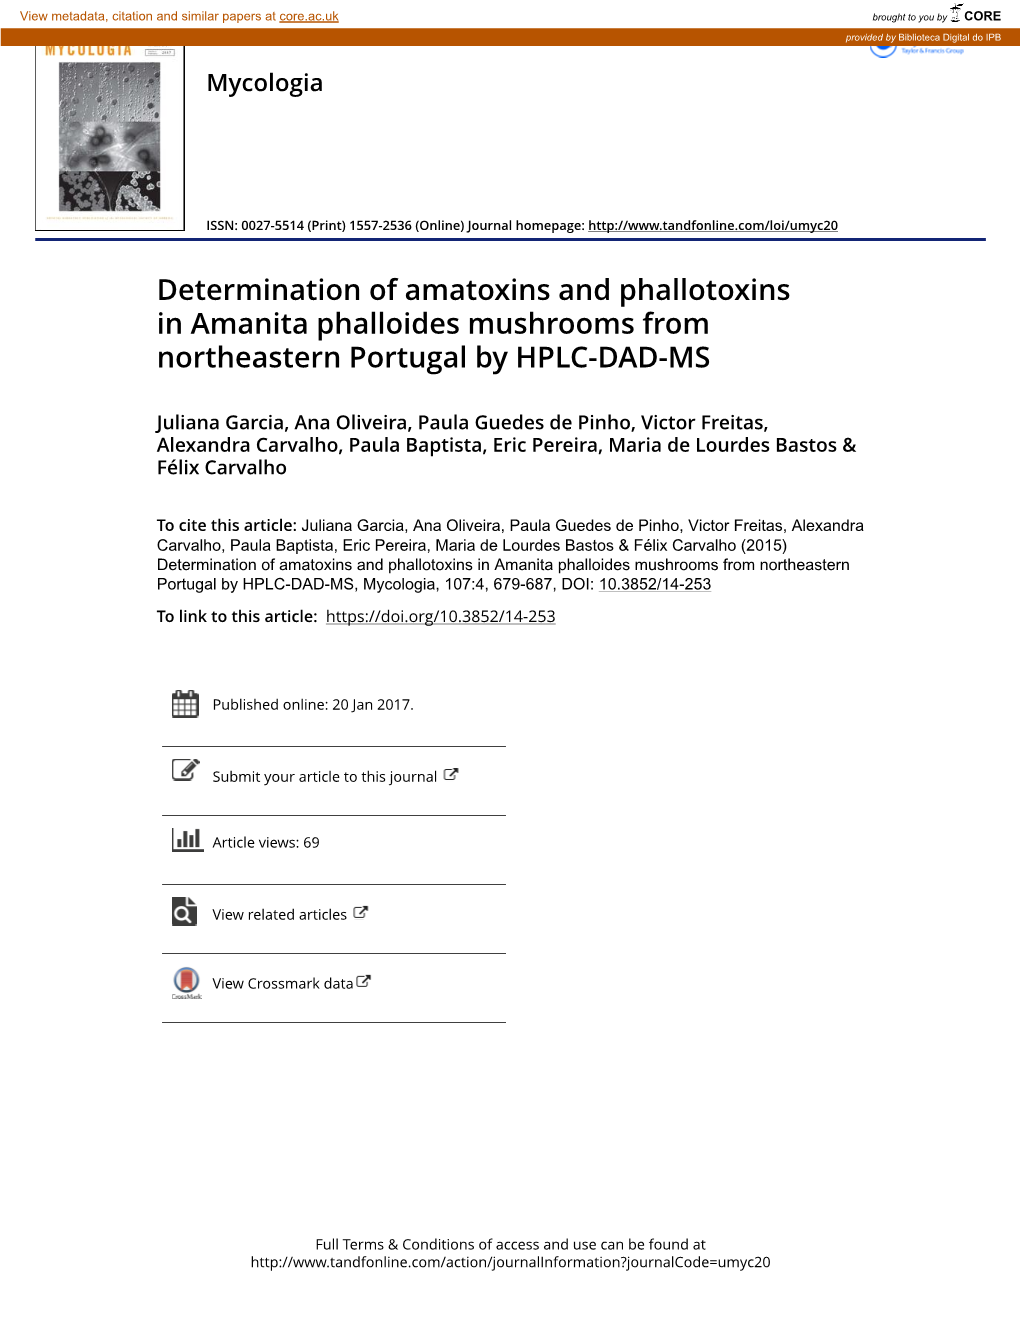 Determination of Amatoxins and Phallotoxins in Amanita Phalloides Mushrooms from Northeastern Portugal by HPLC-DAD-MS